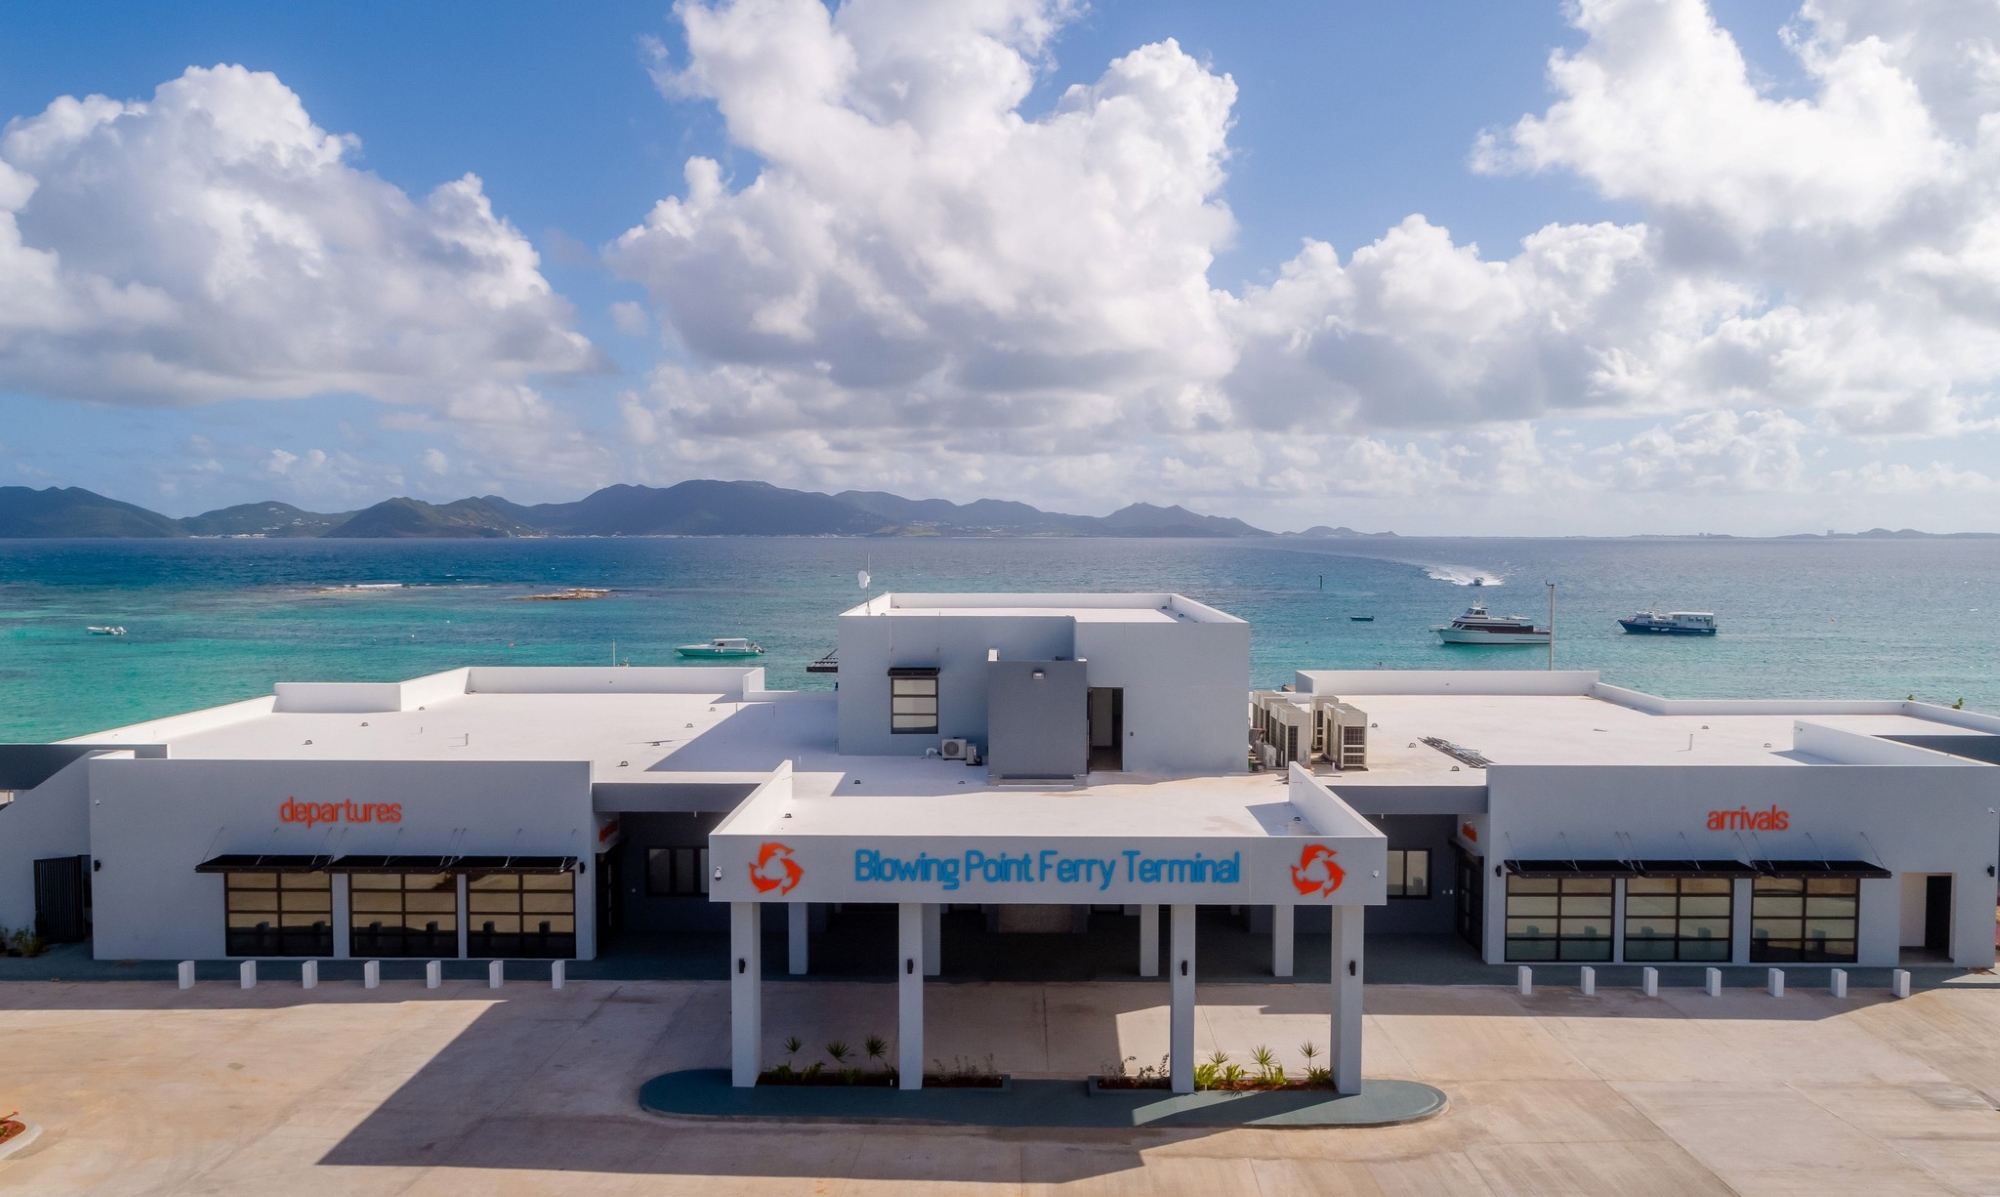 Blowing Point Ferry Terminal Anguilla